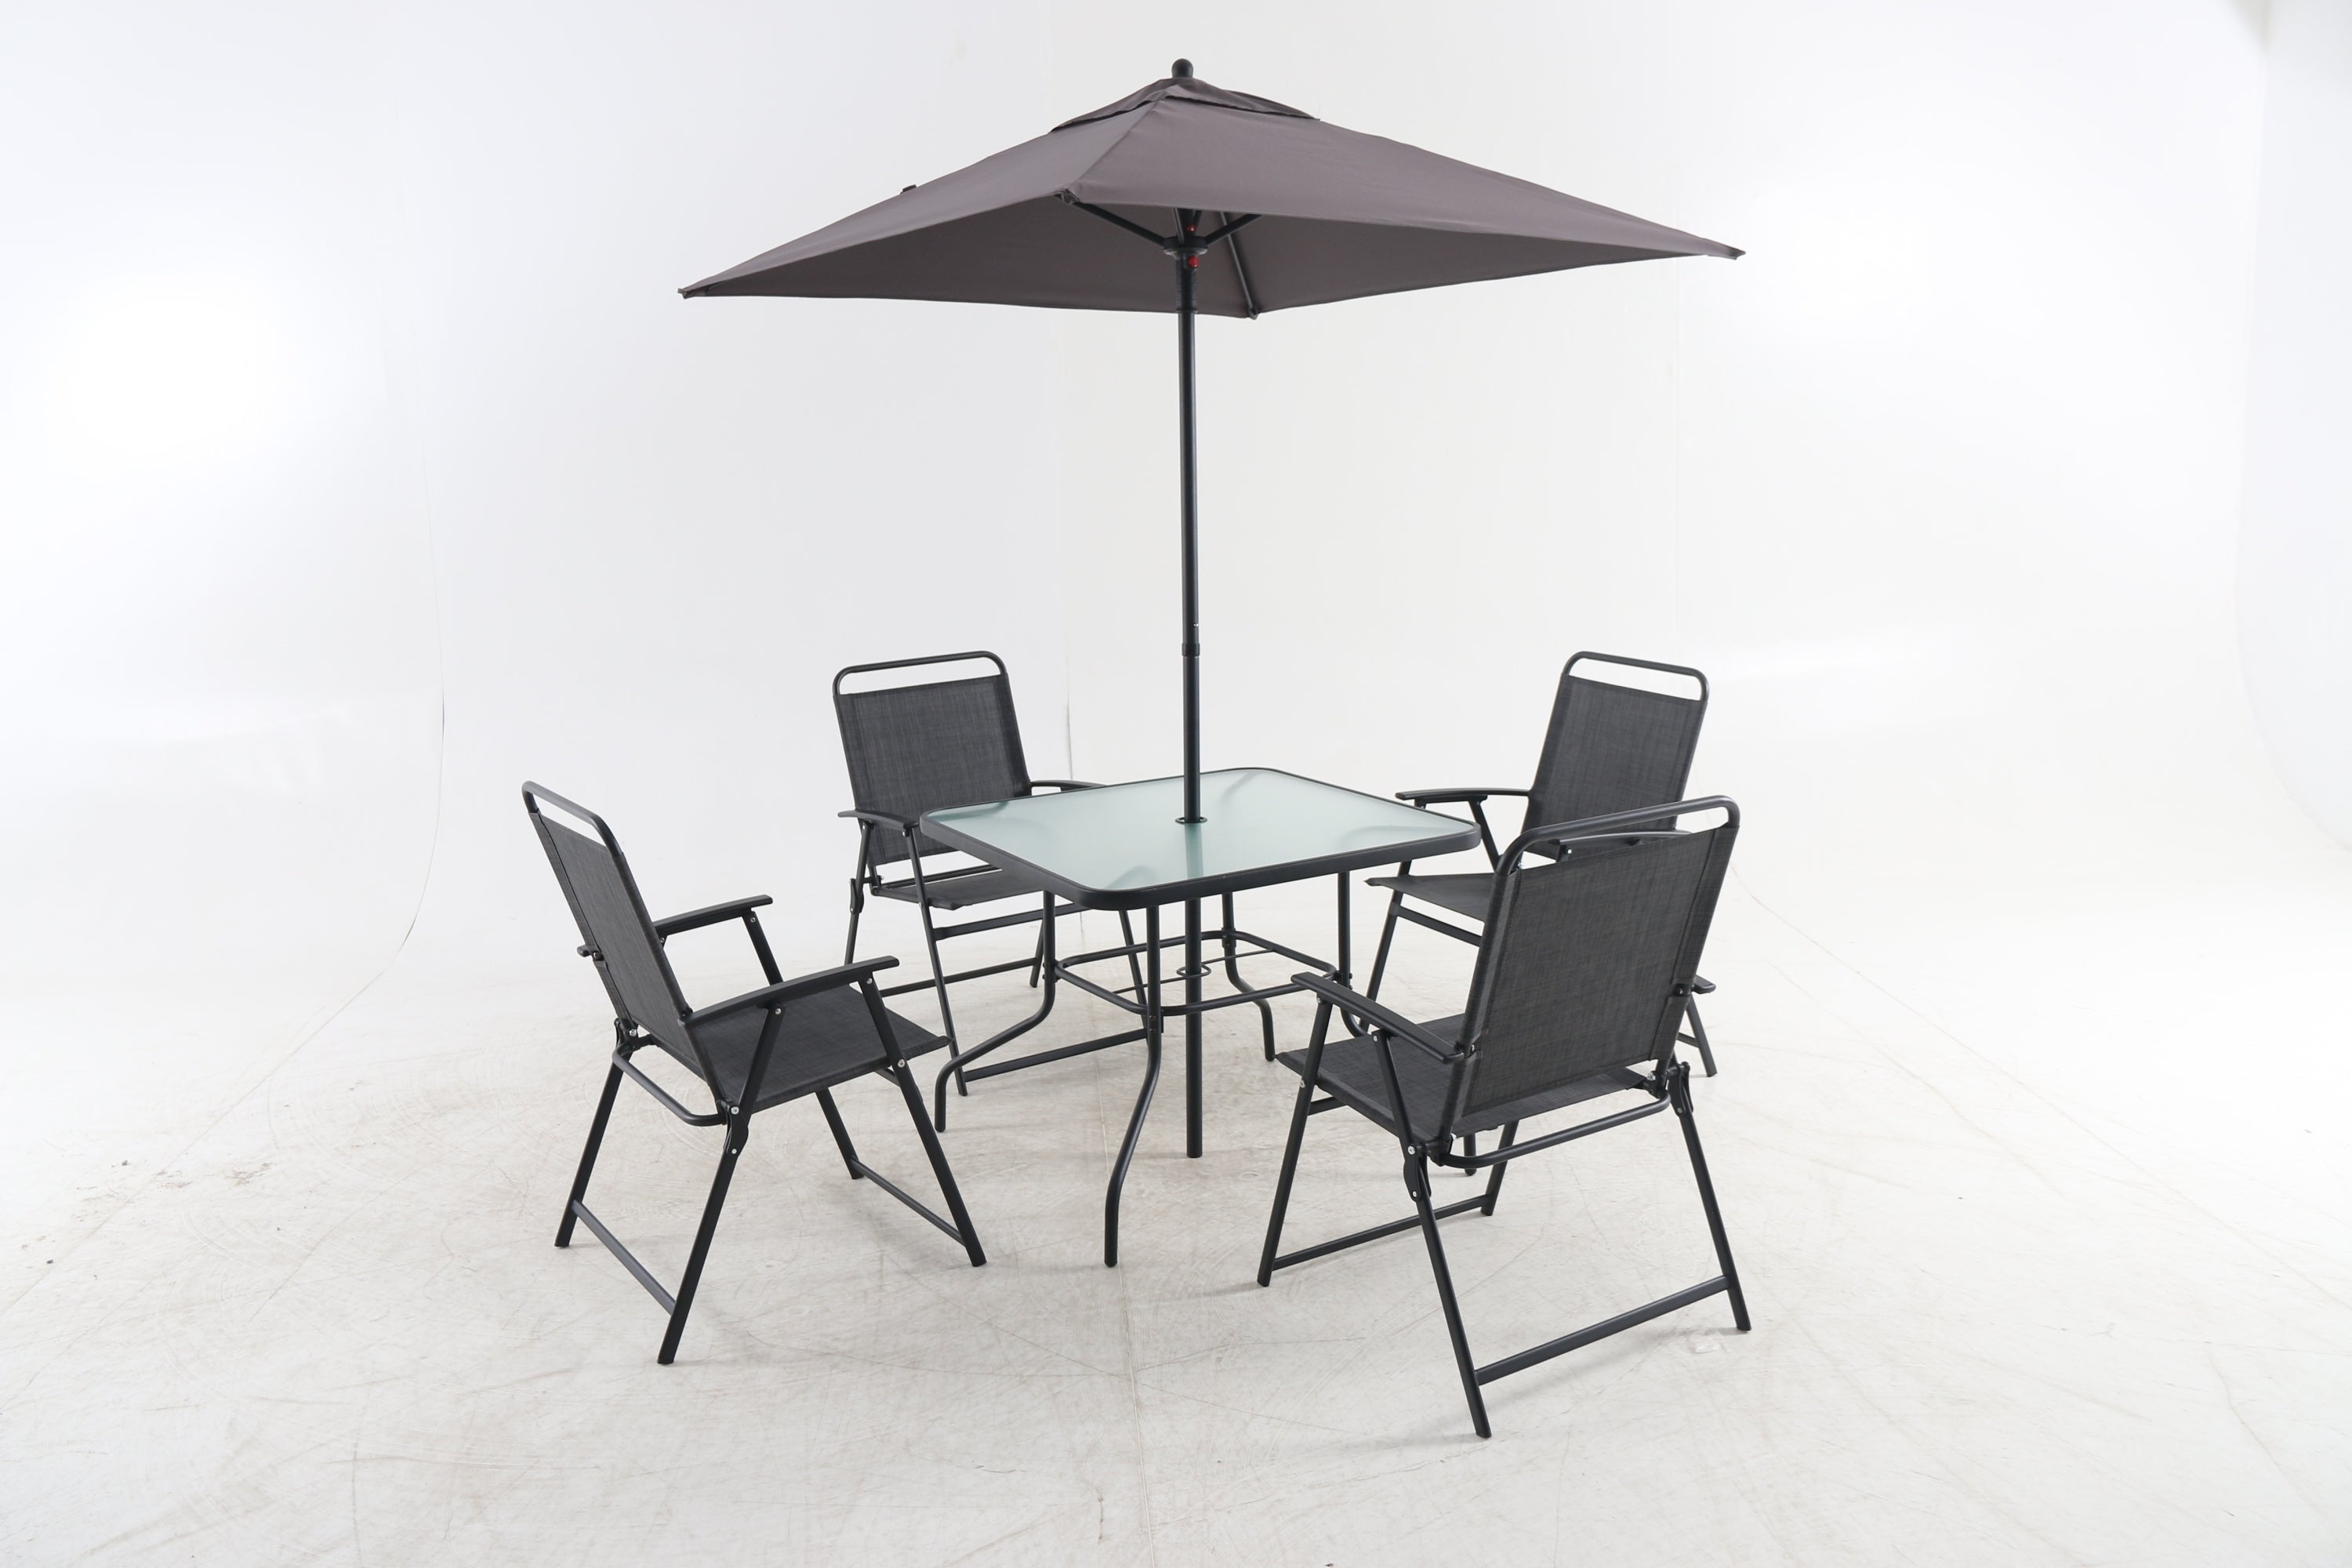 Outdoor Patio Dining Set for 4 People, Metal Patio Furniture Table and Chair Set with Umbrella, Black